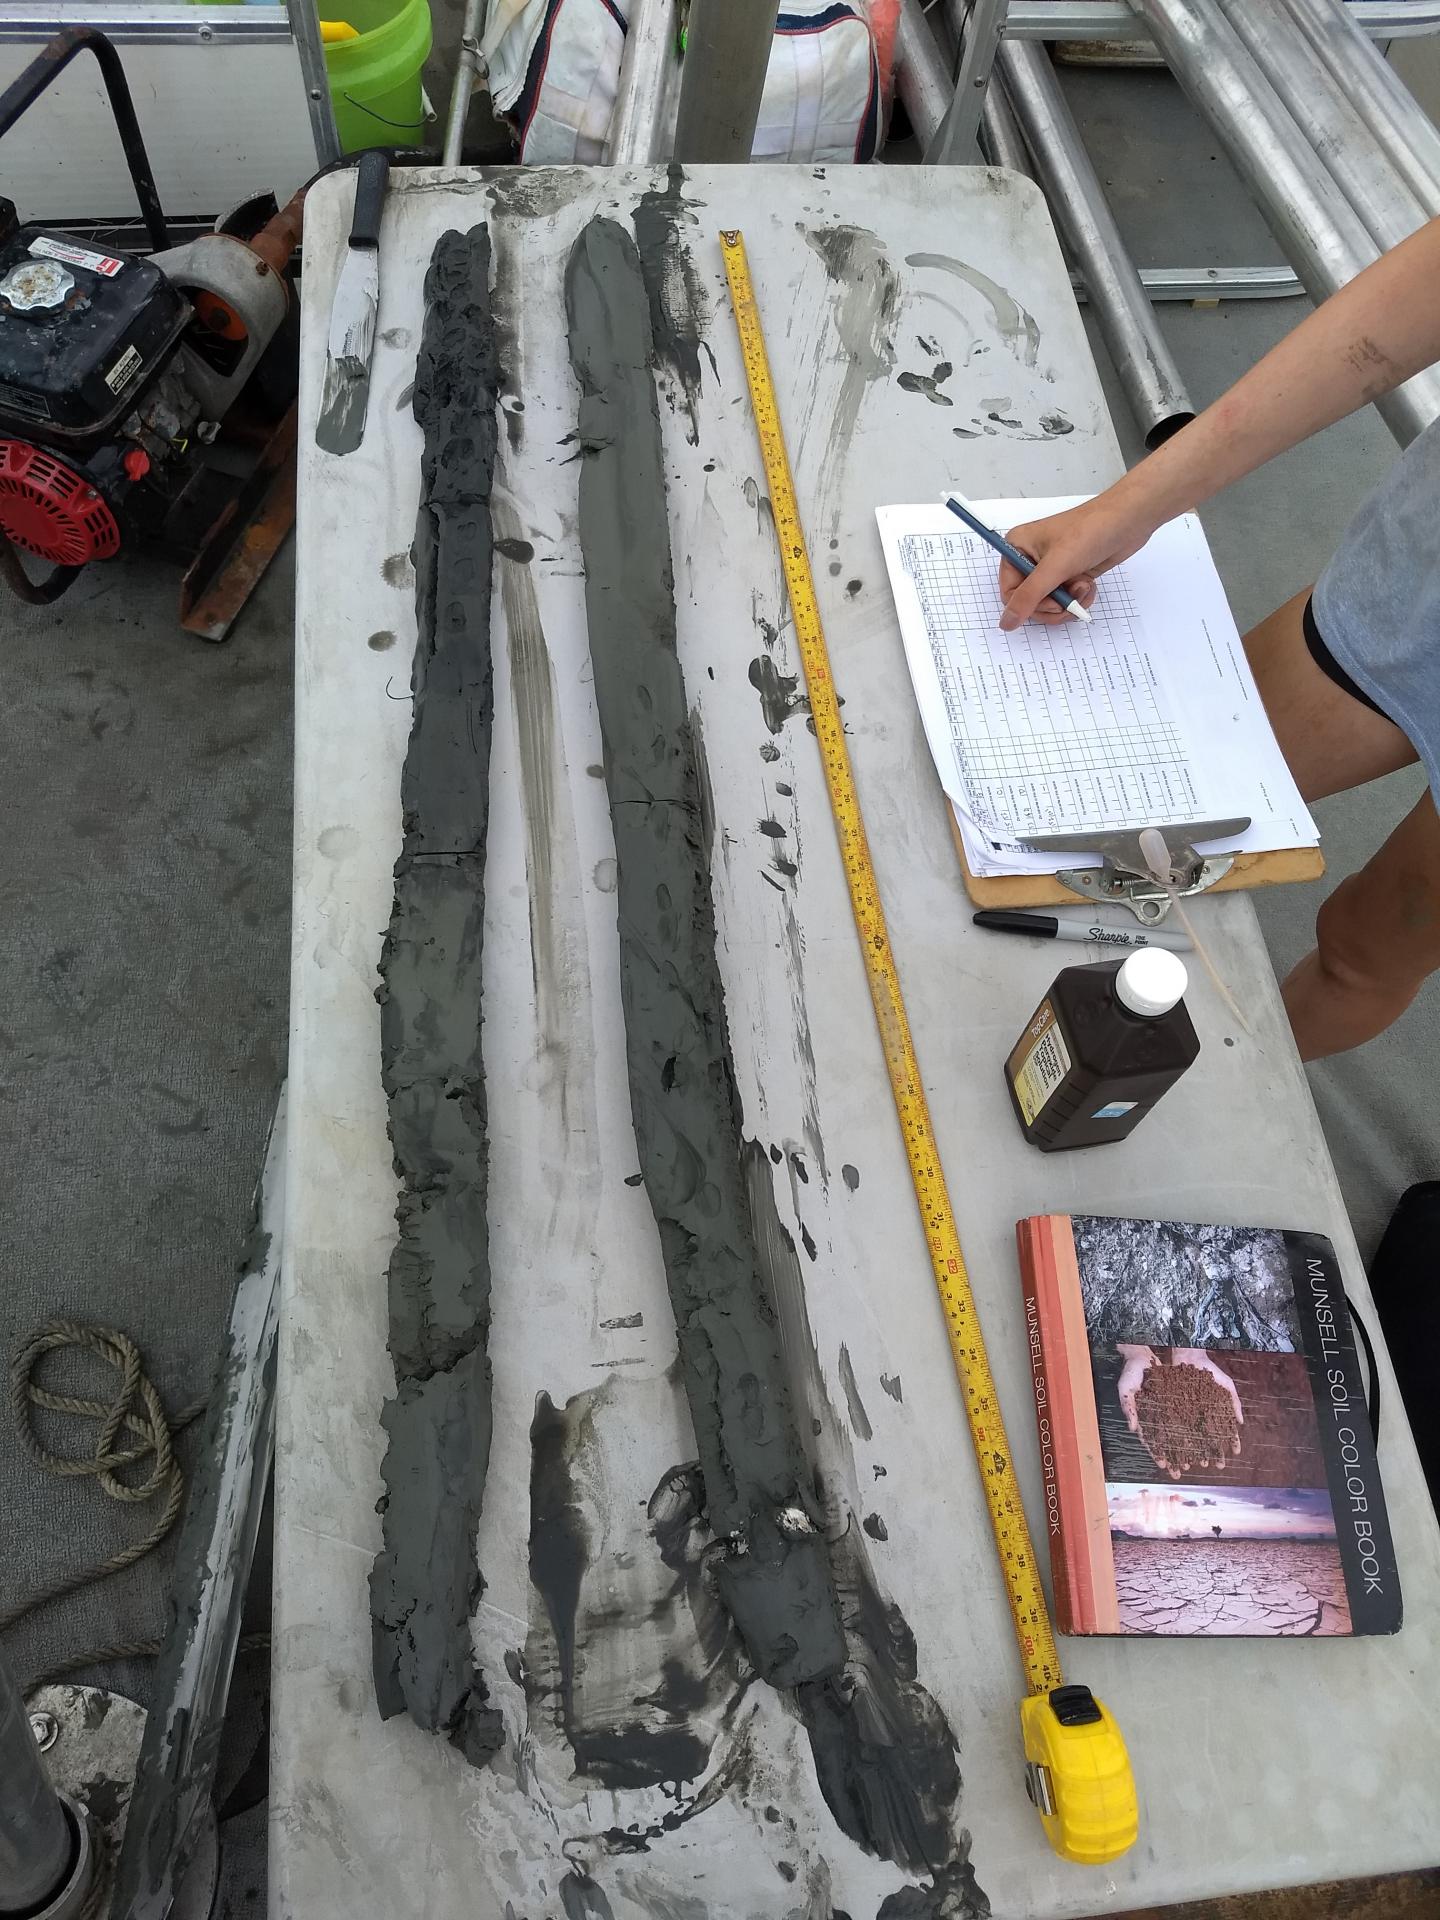 Describing soils on a boat can be tricky. The crew collected two meters of this soil from a submerged cove, and is hard at work describing colors, textures, and more. White spots deep in the core on the right reveal an ancient oyster reef. Photo credit Barret Wessel.  CREDIT Barret Wessel